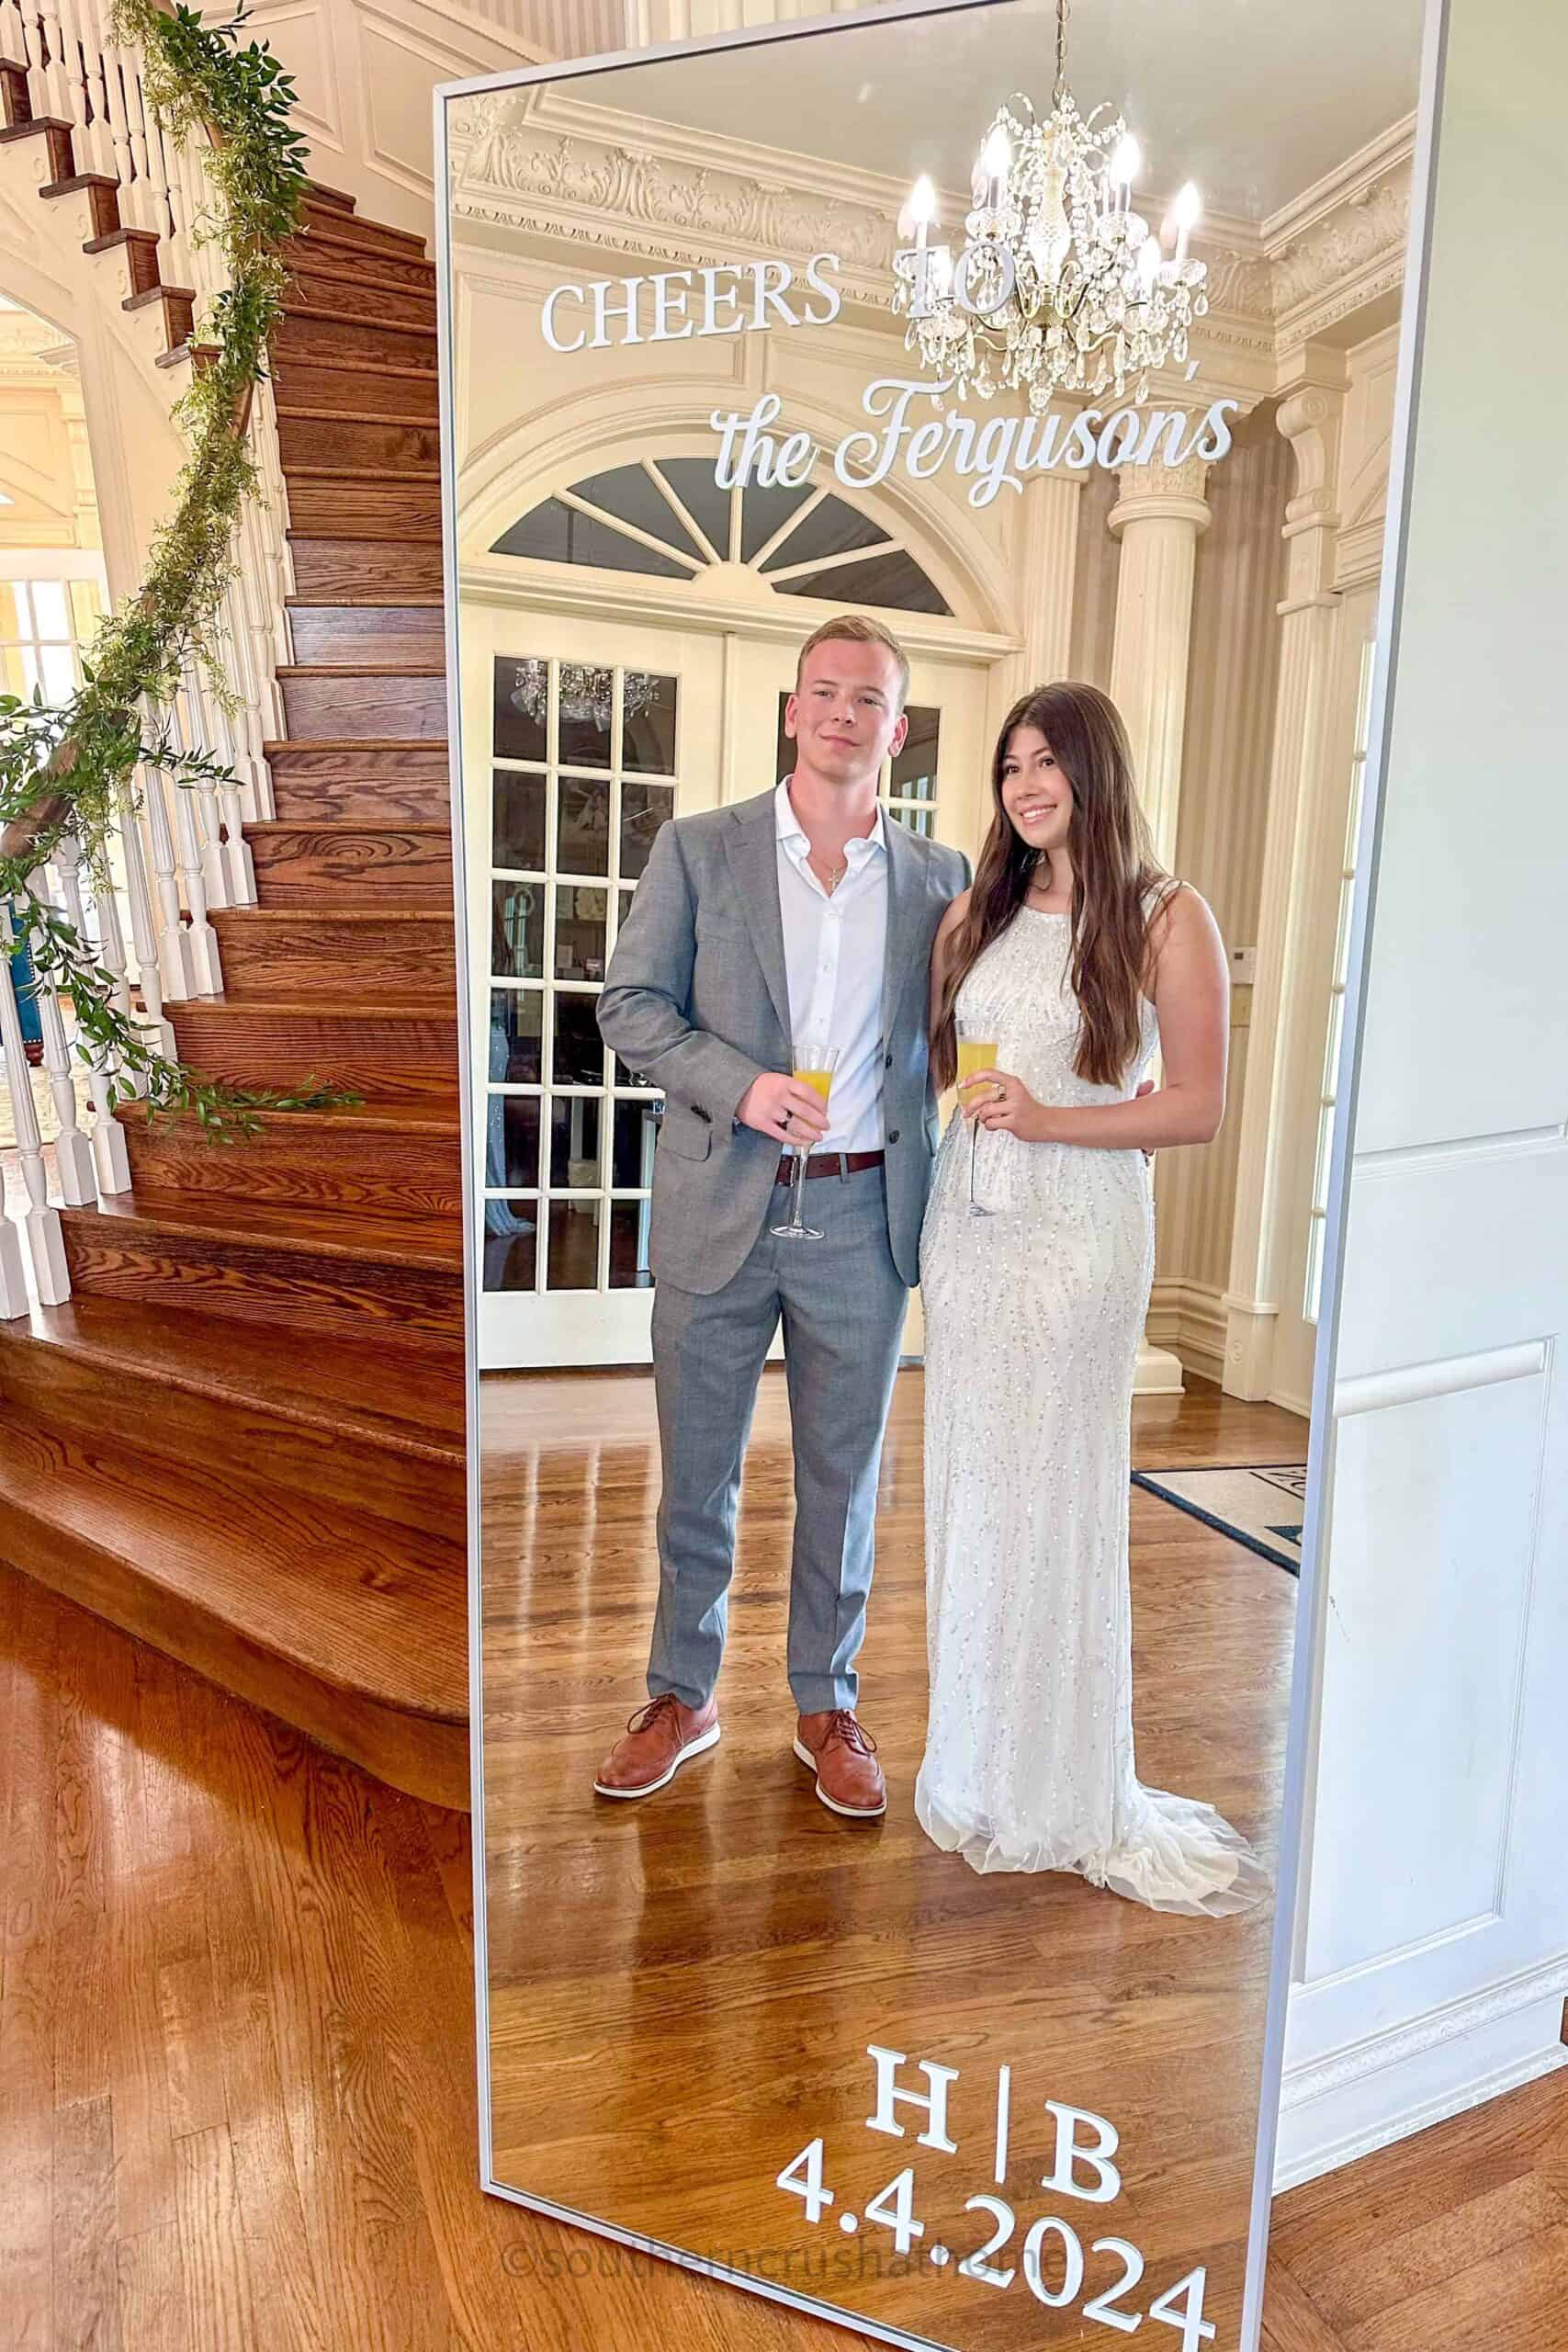 Brady and Hadley Ferguson in front of wedding welcome sign mirror